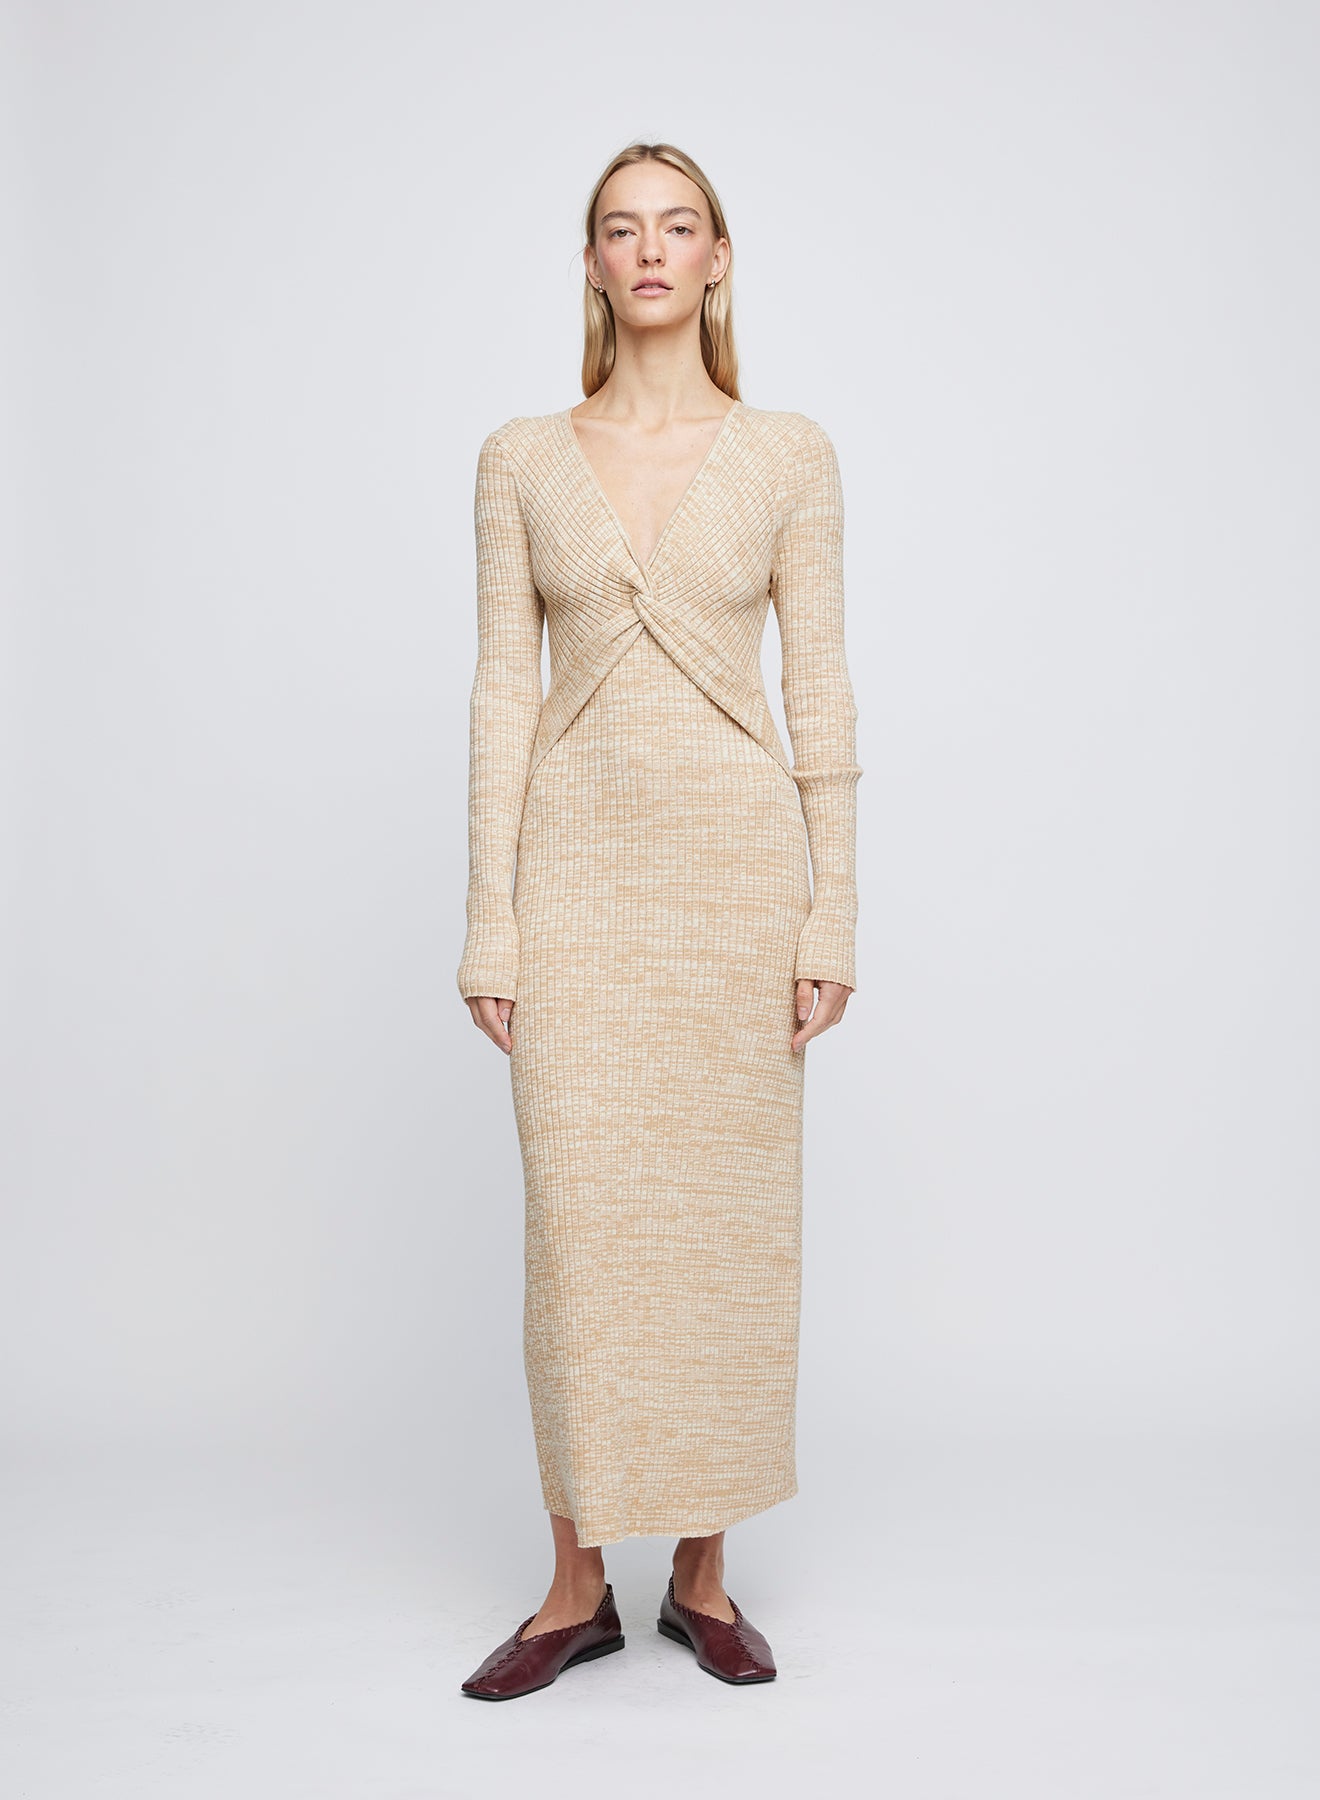 The ANNA QUAN Nova Dress is the dress for any occasion, designed in a soft 100% cotton rib that stretches and sculpts the body. Completed with a v neckline and centre front twist for a modern touch.